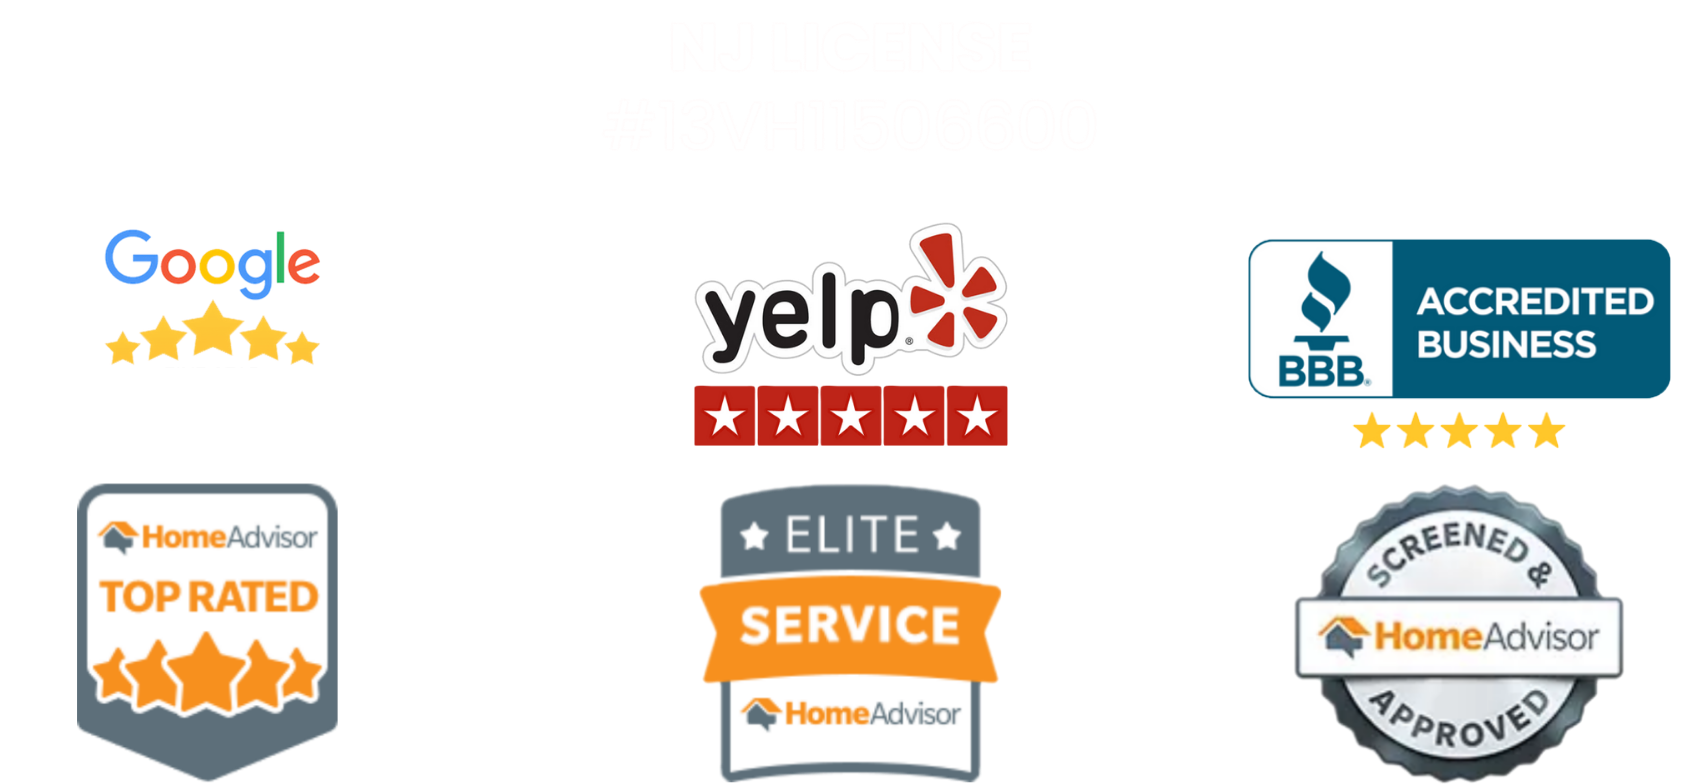 Positive review badges from HomeAdvisor, Yelp, Google, and the BBB.